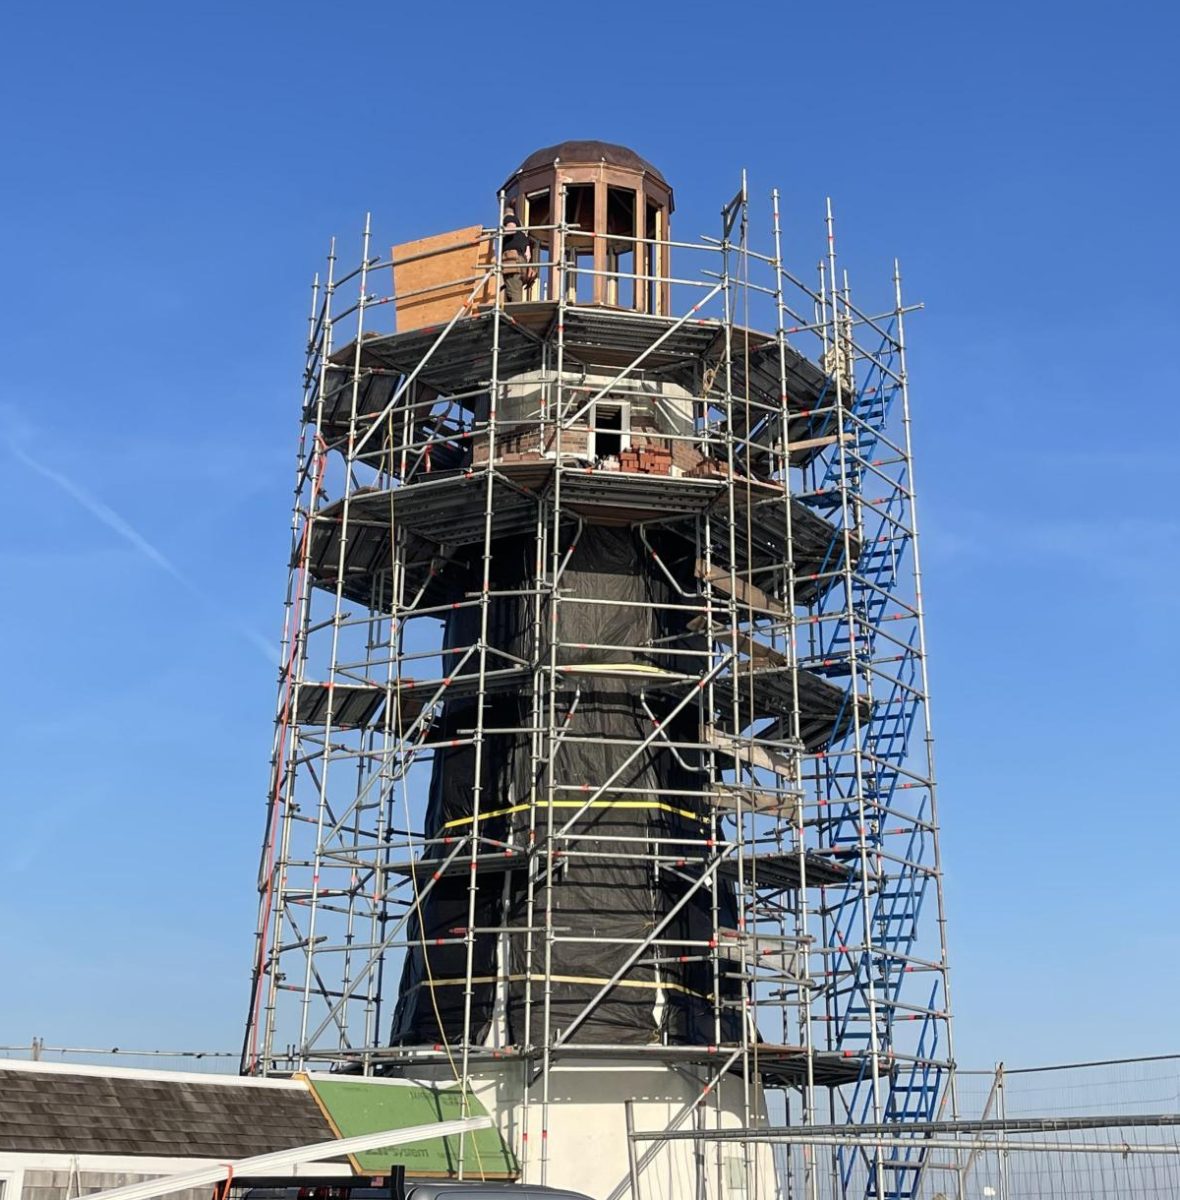 Scituate Lighthouse Update–The Lantern Room is Back!